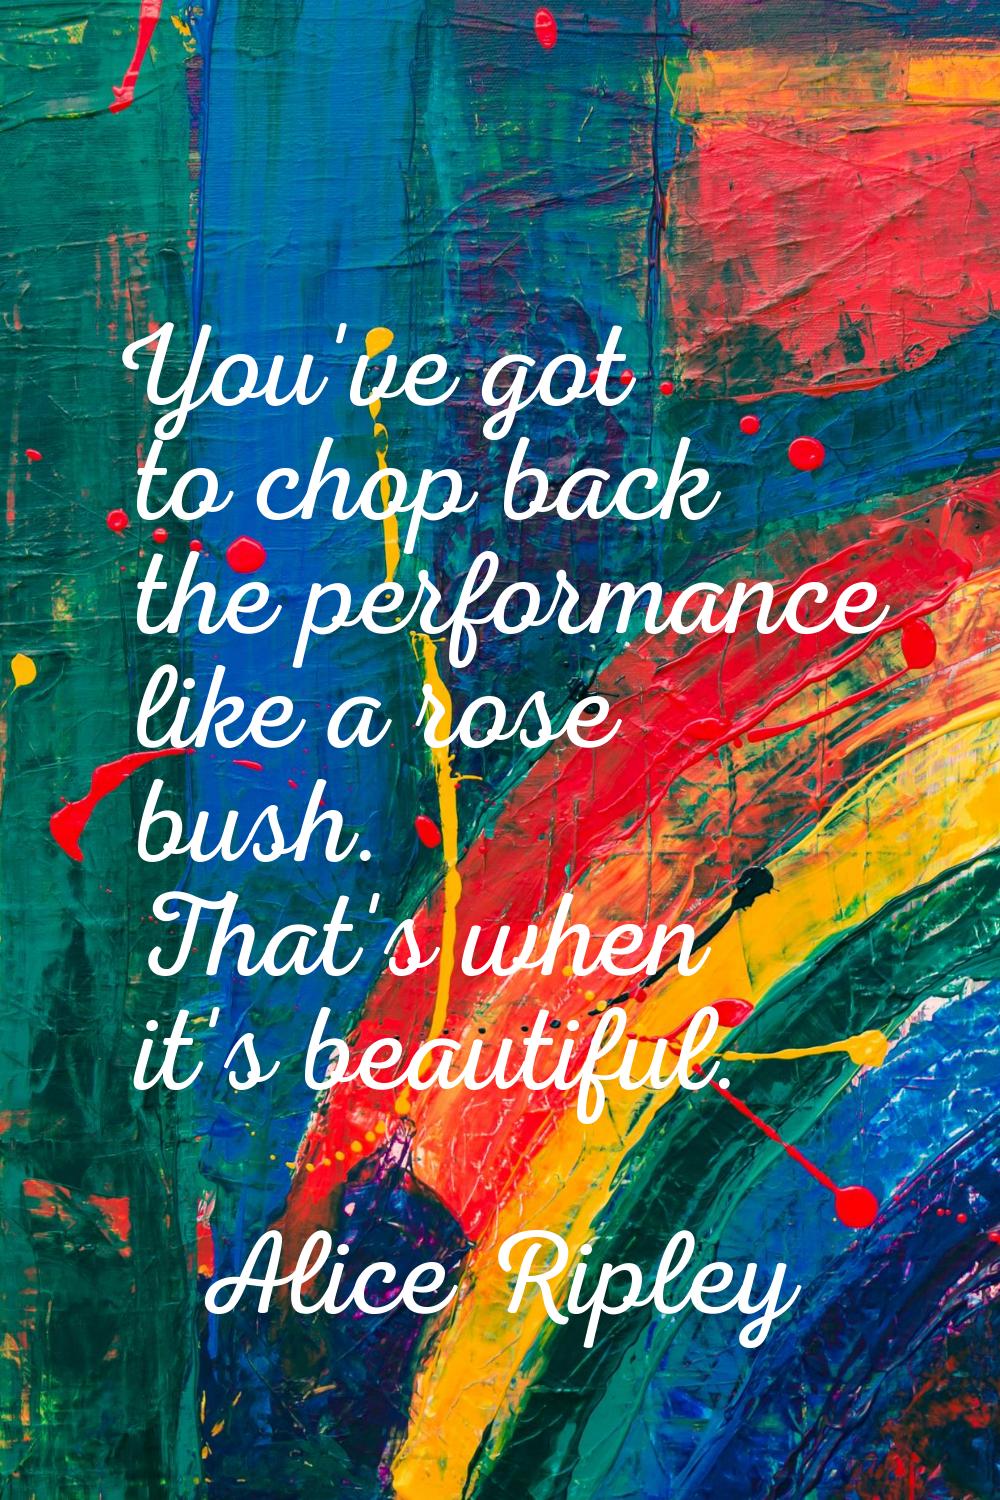 You've got to chop back the performance like a rose bush. That's when it's beautiful.